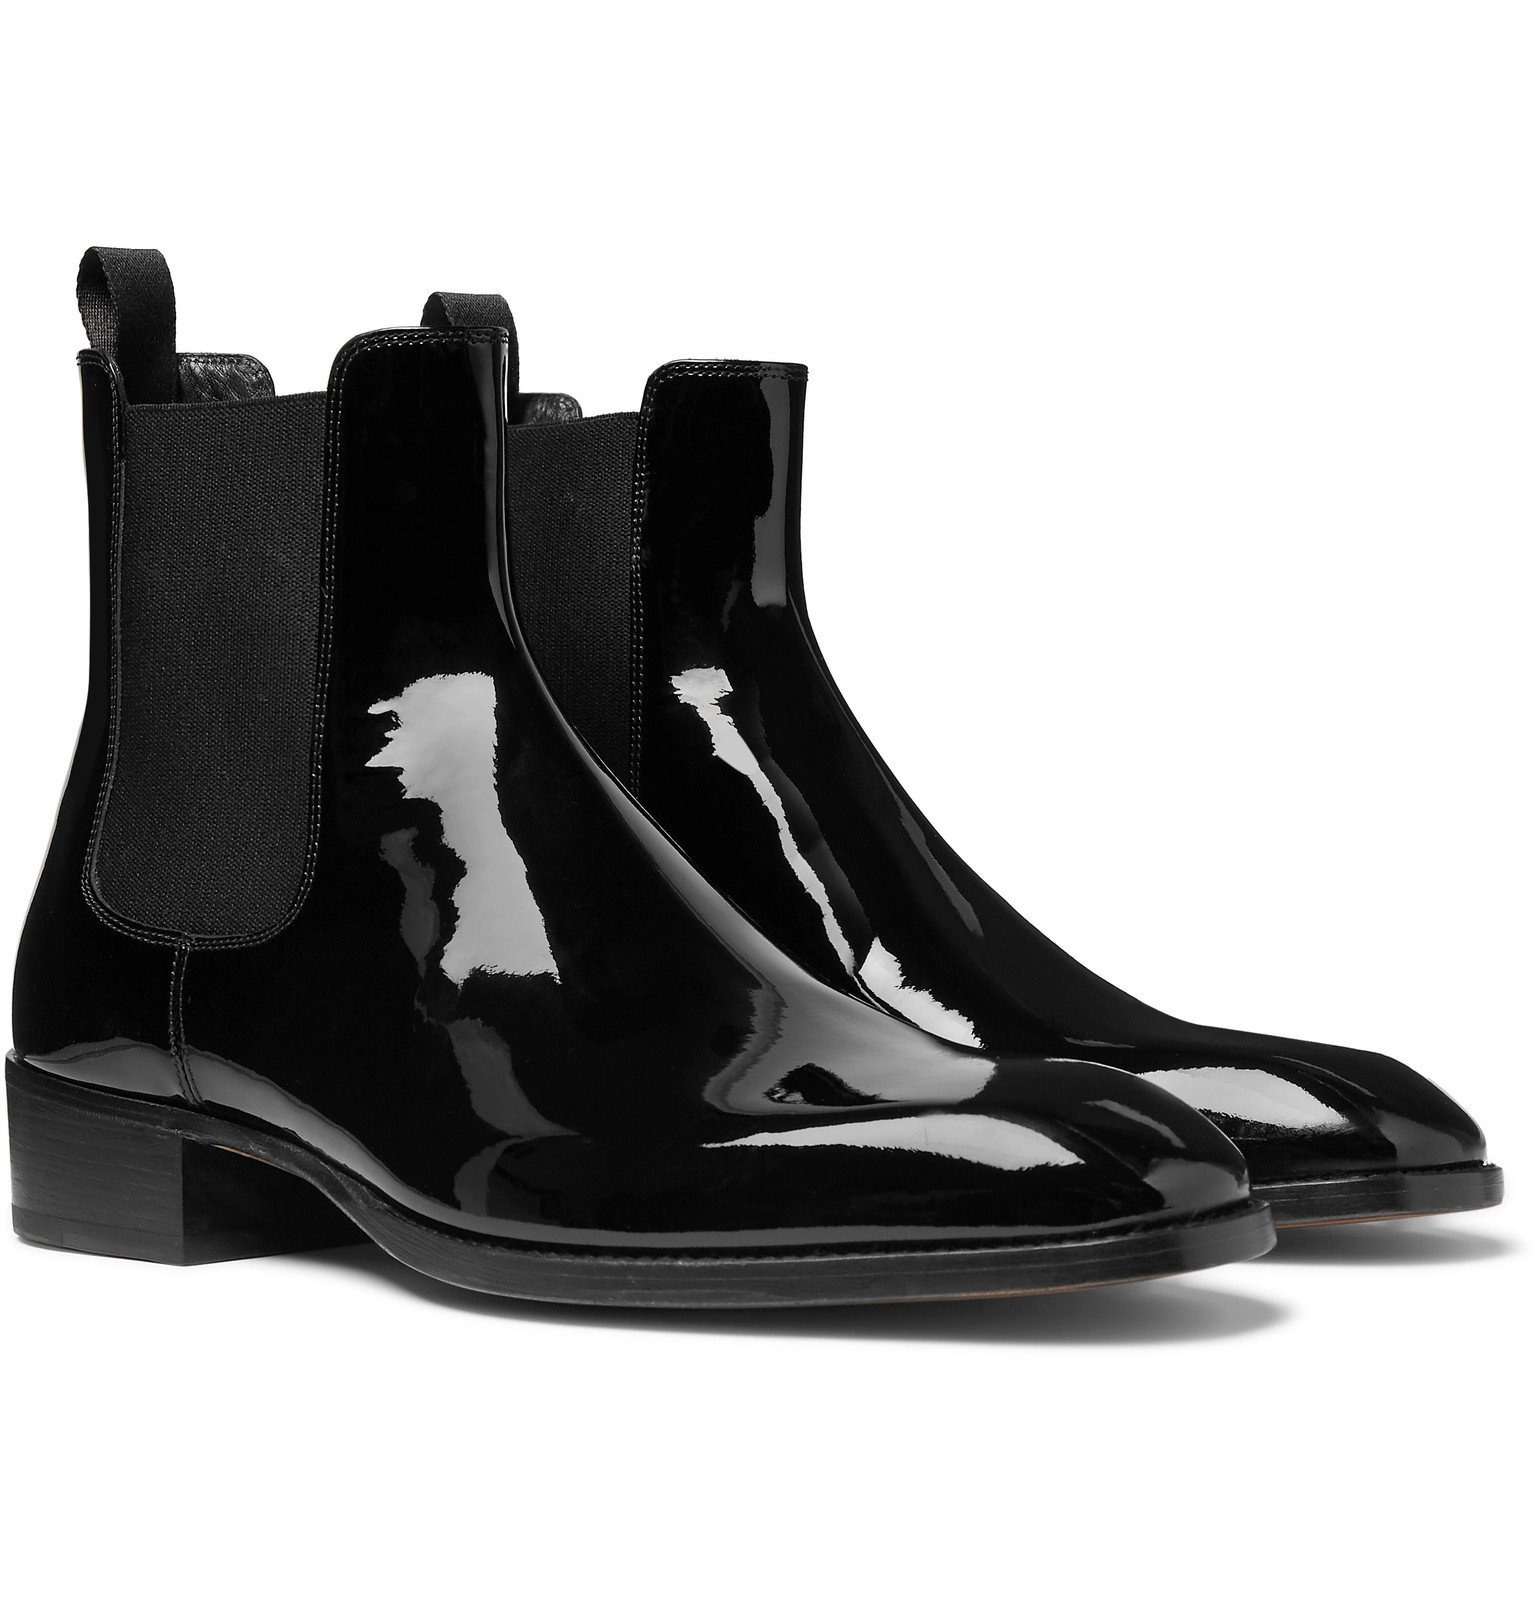 TOM FORD - Hainaut Patent-Leather Chelsea Boots - Black TOM FORD